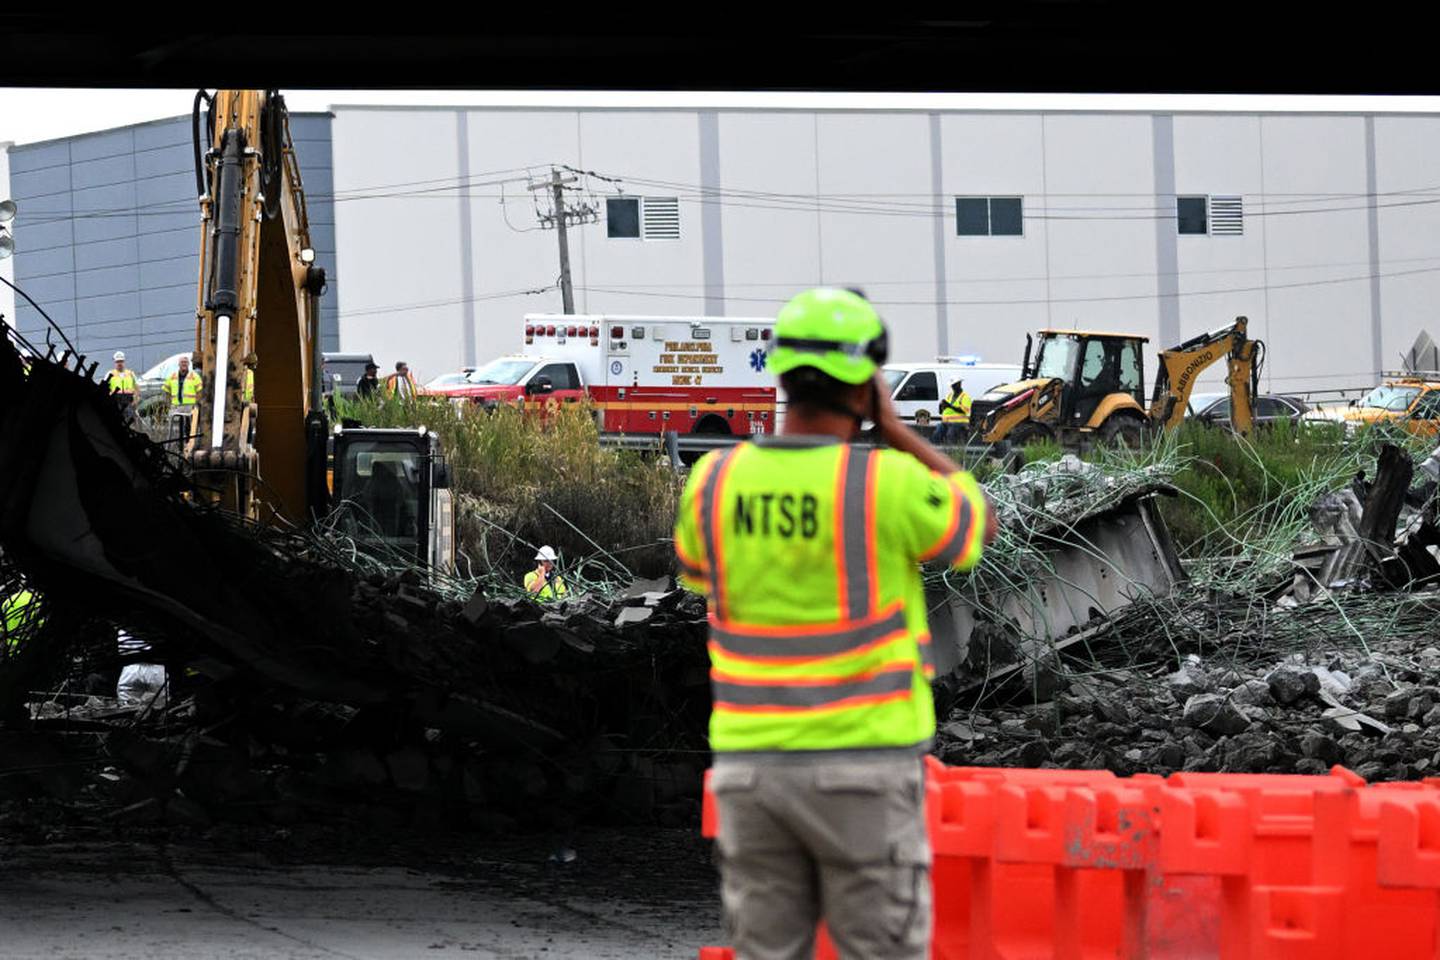 PHILADELPHIA, PENNSYLVANIA - JUNE 12: A person with a National Transportation Safety Board vest photographs a section of bridge that collapsed on Interstate 95 after an oil tanker explosion on June 12, 2023 in Philadelphia, Pennsylvania.  Traffic was severely affected due to the closure of this primary north-to-south highway for East Coast travel.